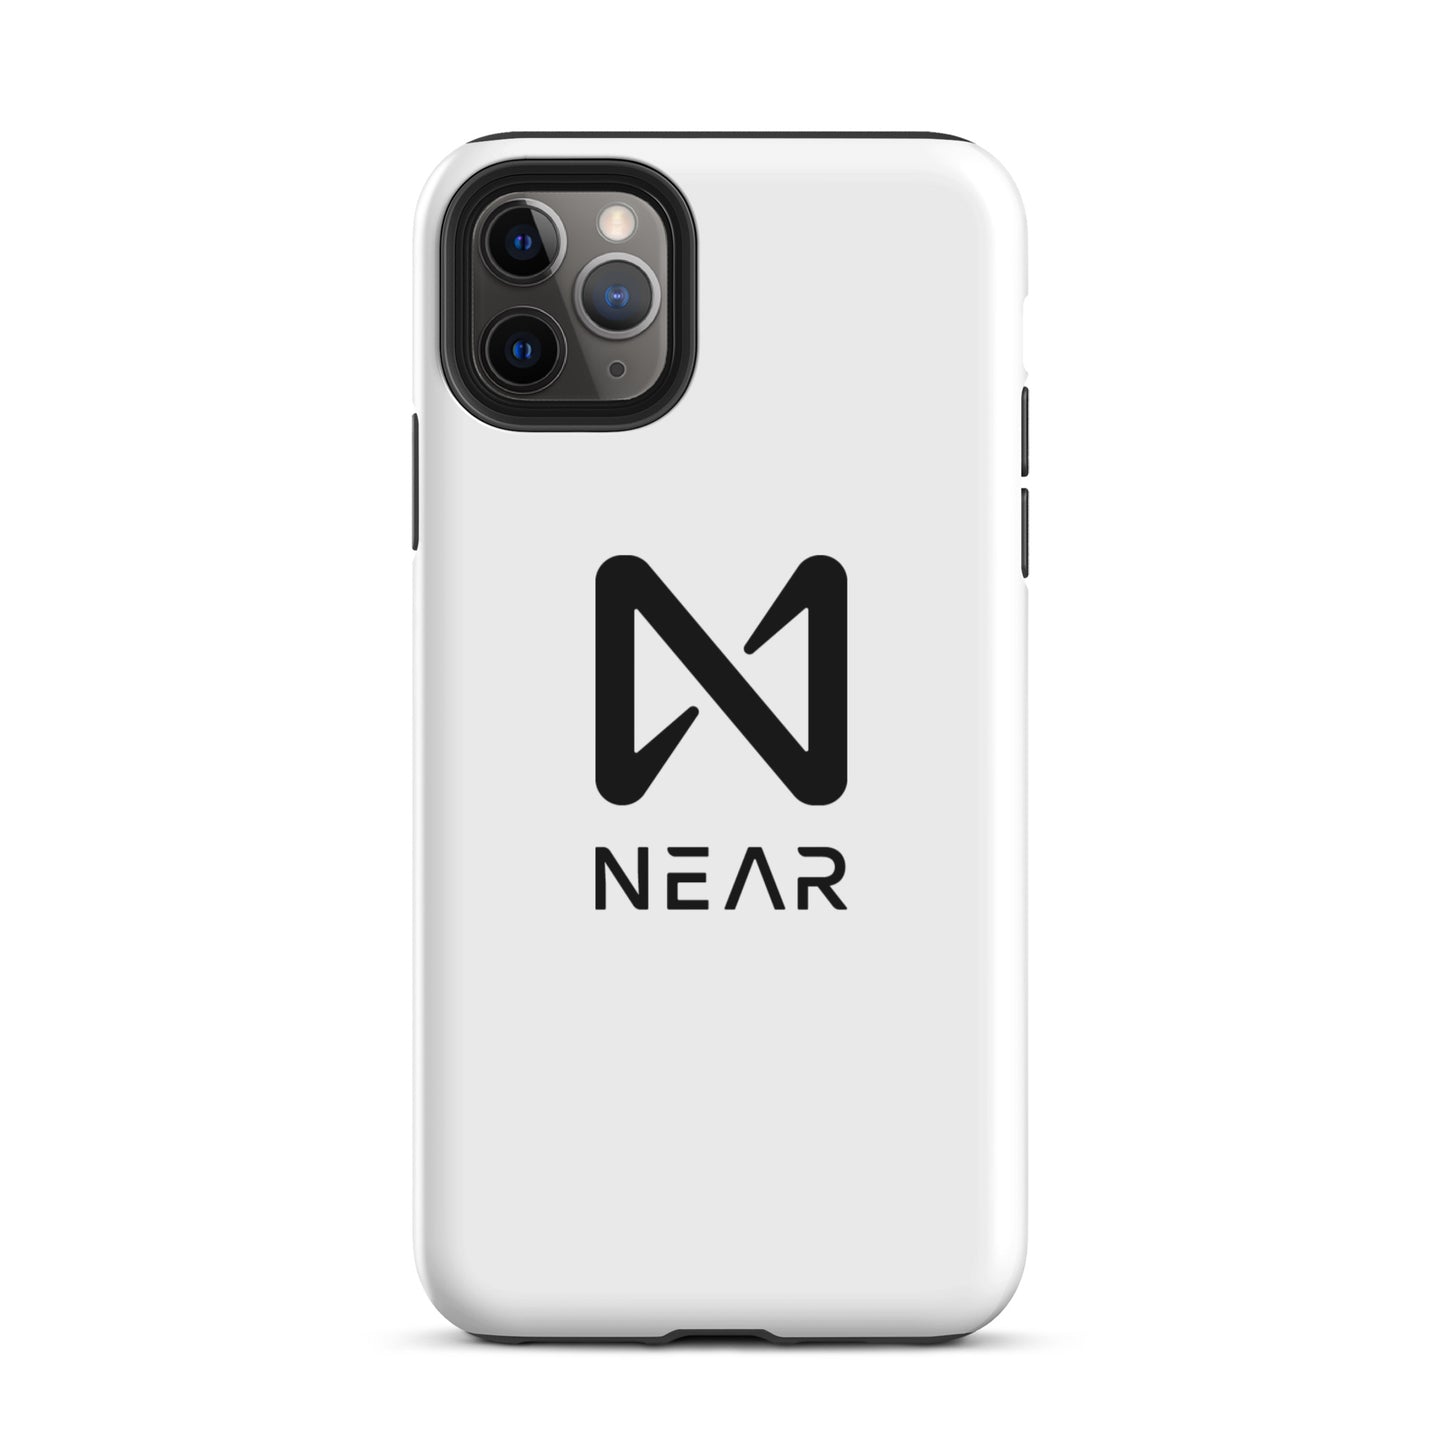 NEAR Core Logo Protected iPhone Case